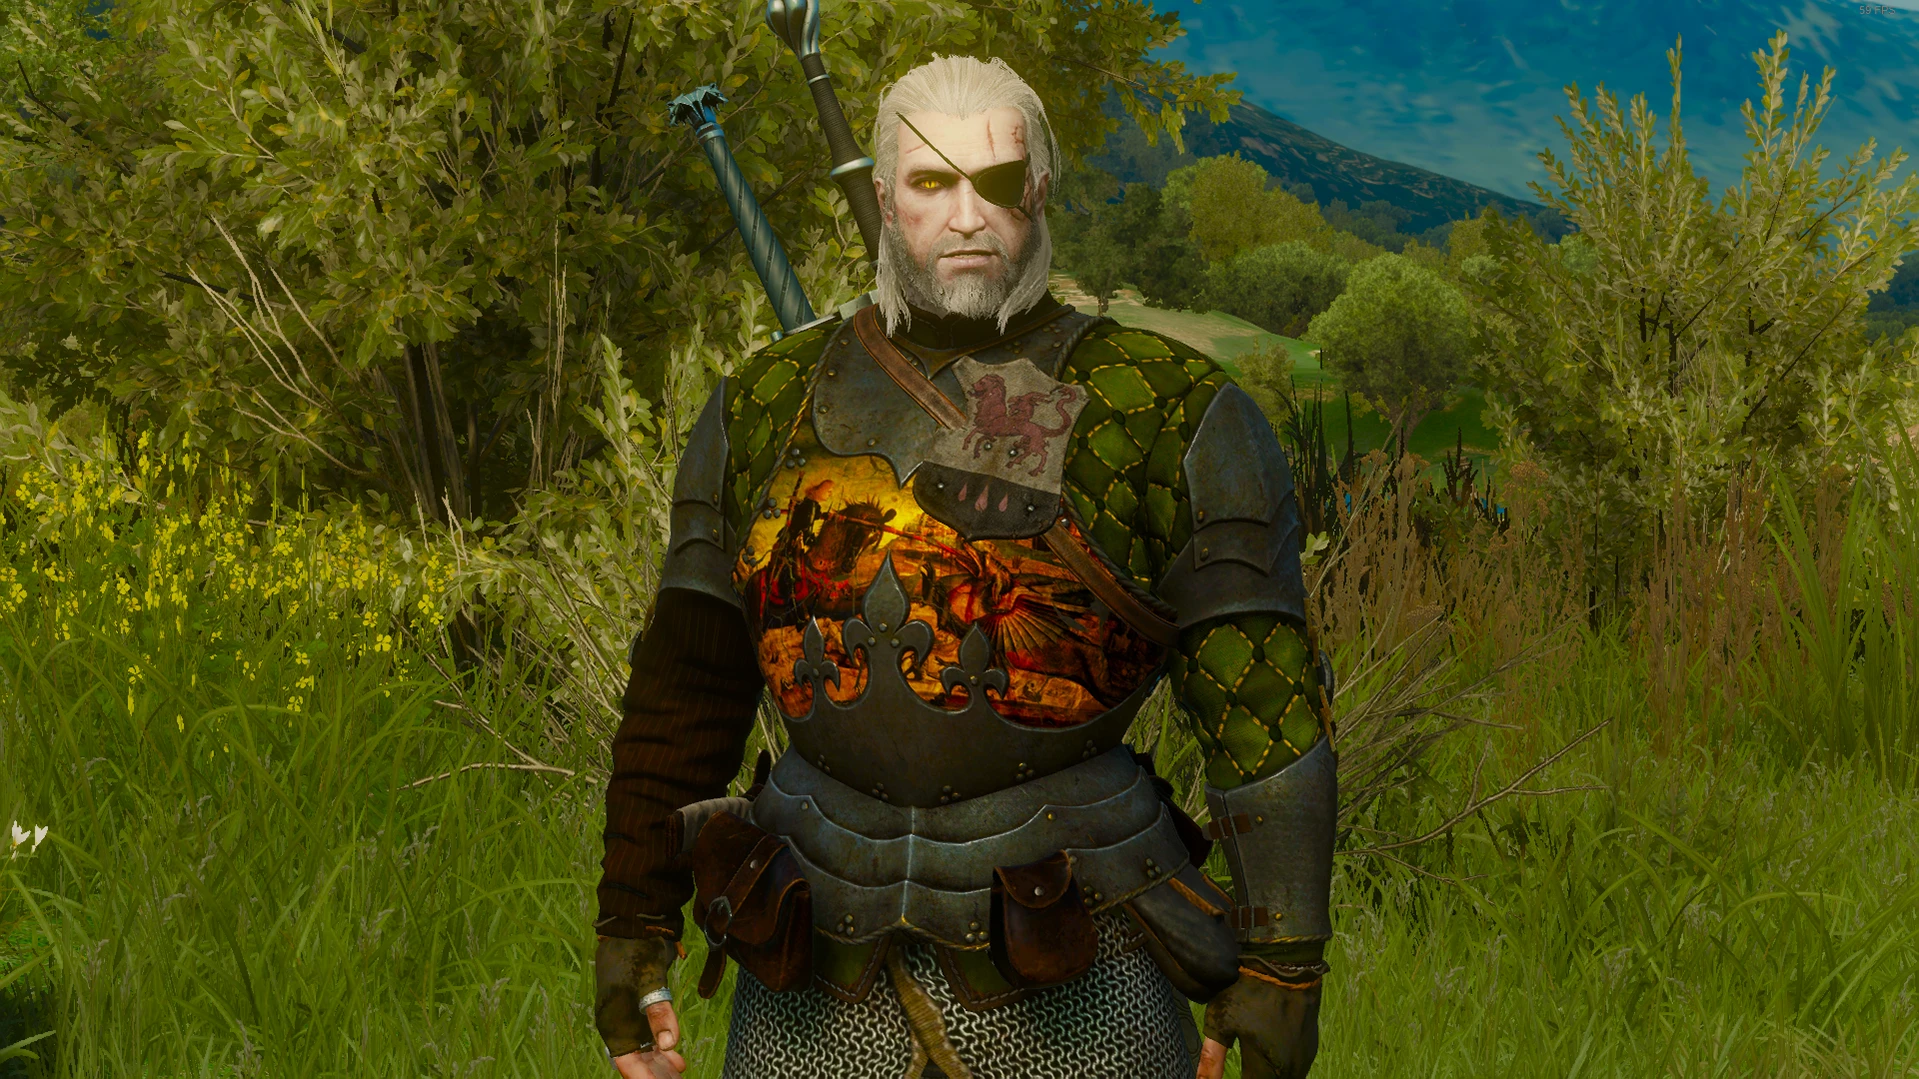 Best the witcher 3 armor фото 37